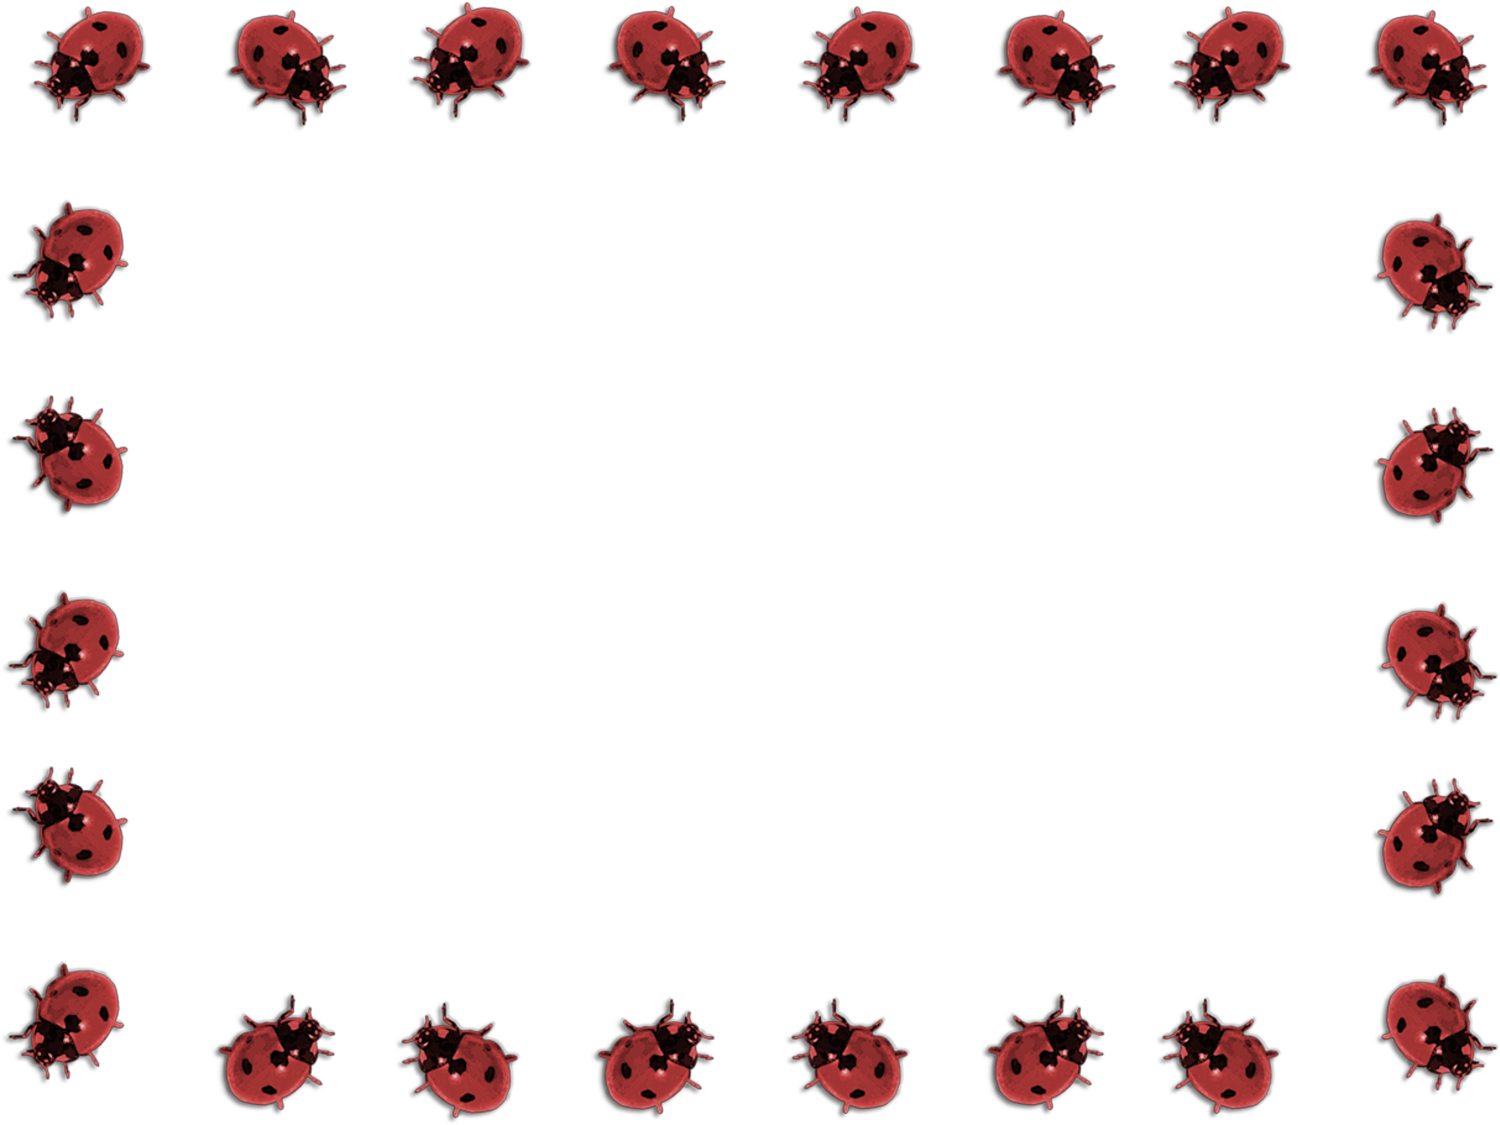 Free Powerpoint Design Template Lady Bug Border